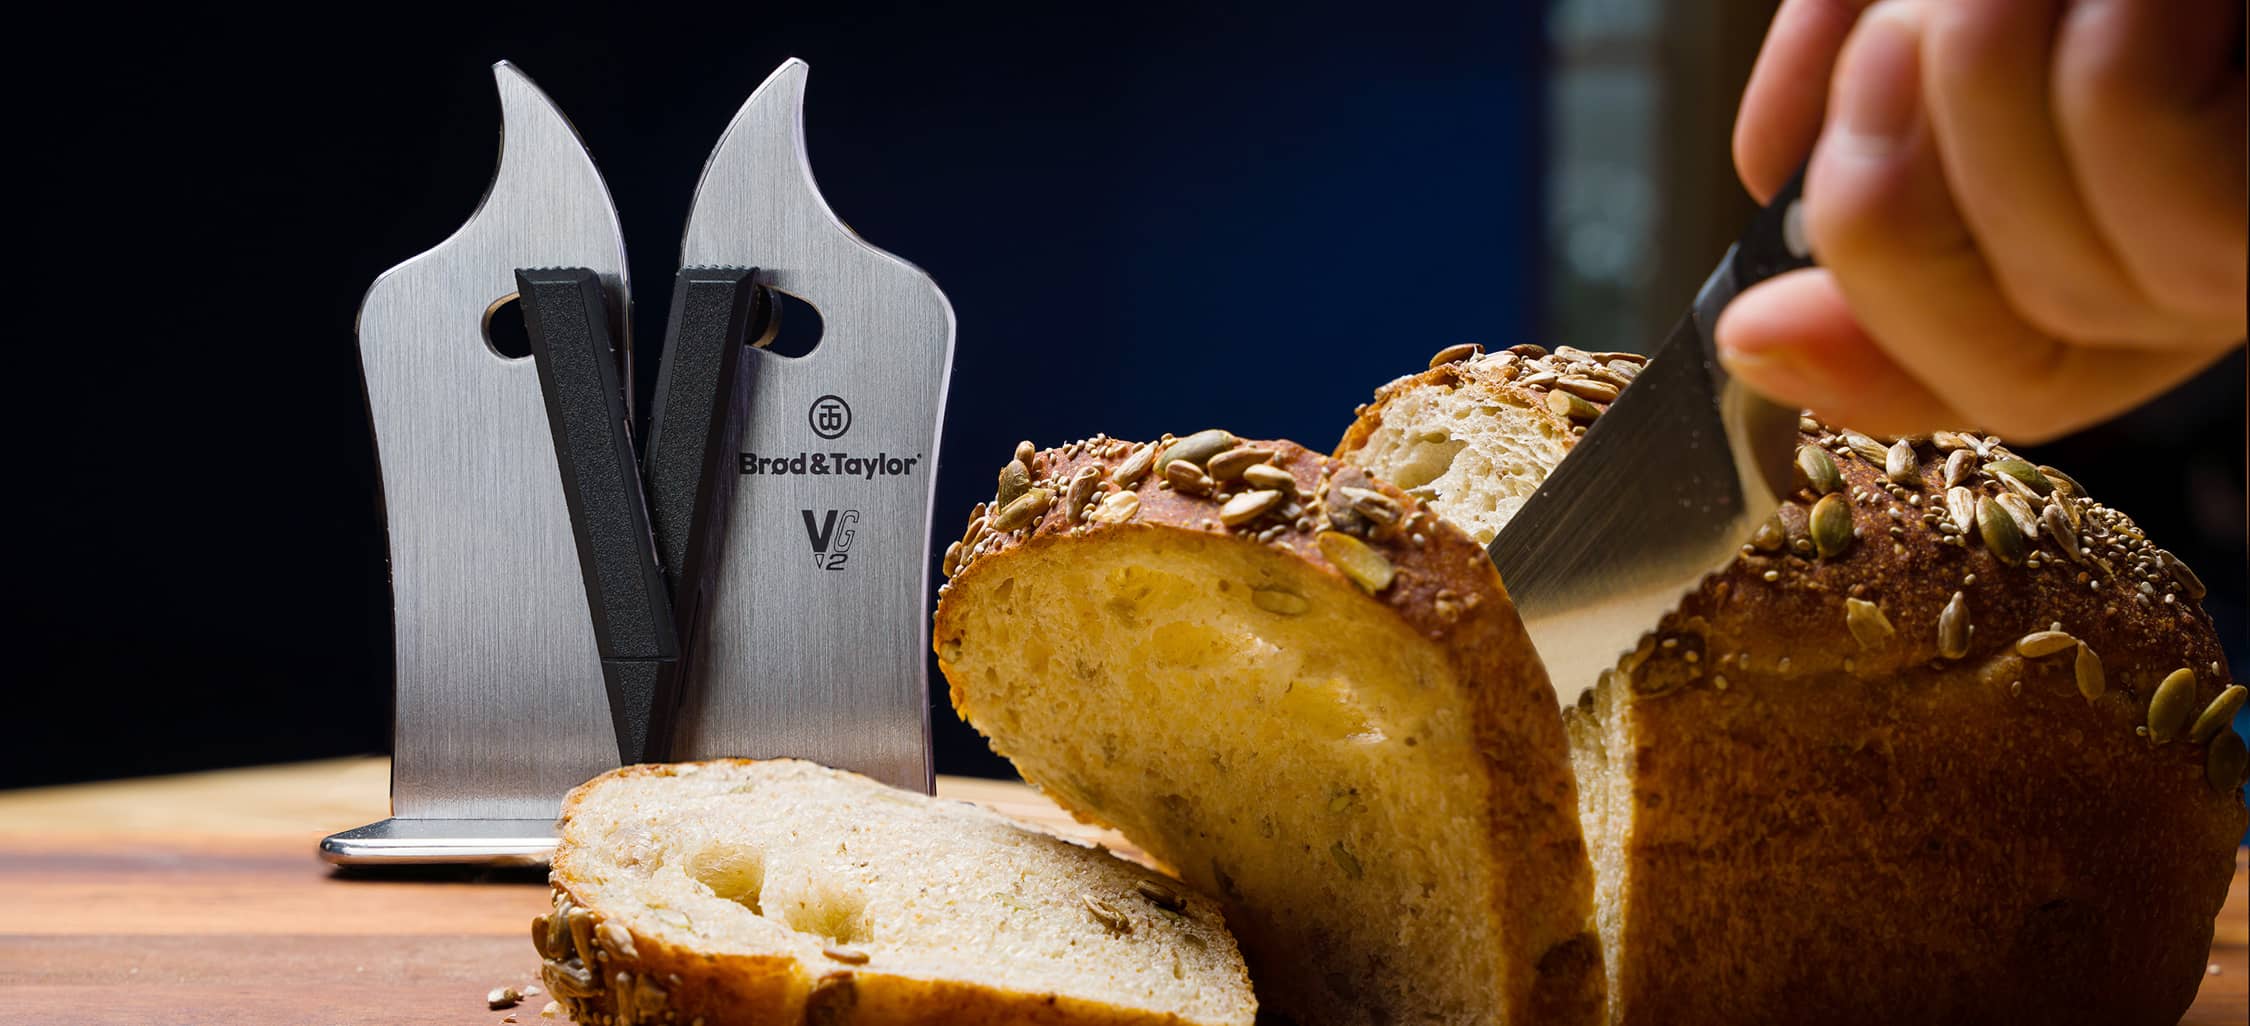 Slicing bread with a bread knife and the Professional VG2 Knife Sharpener in background